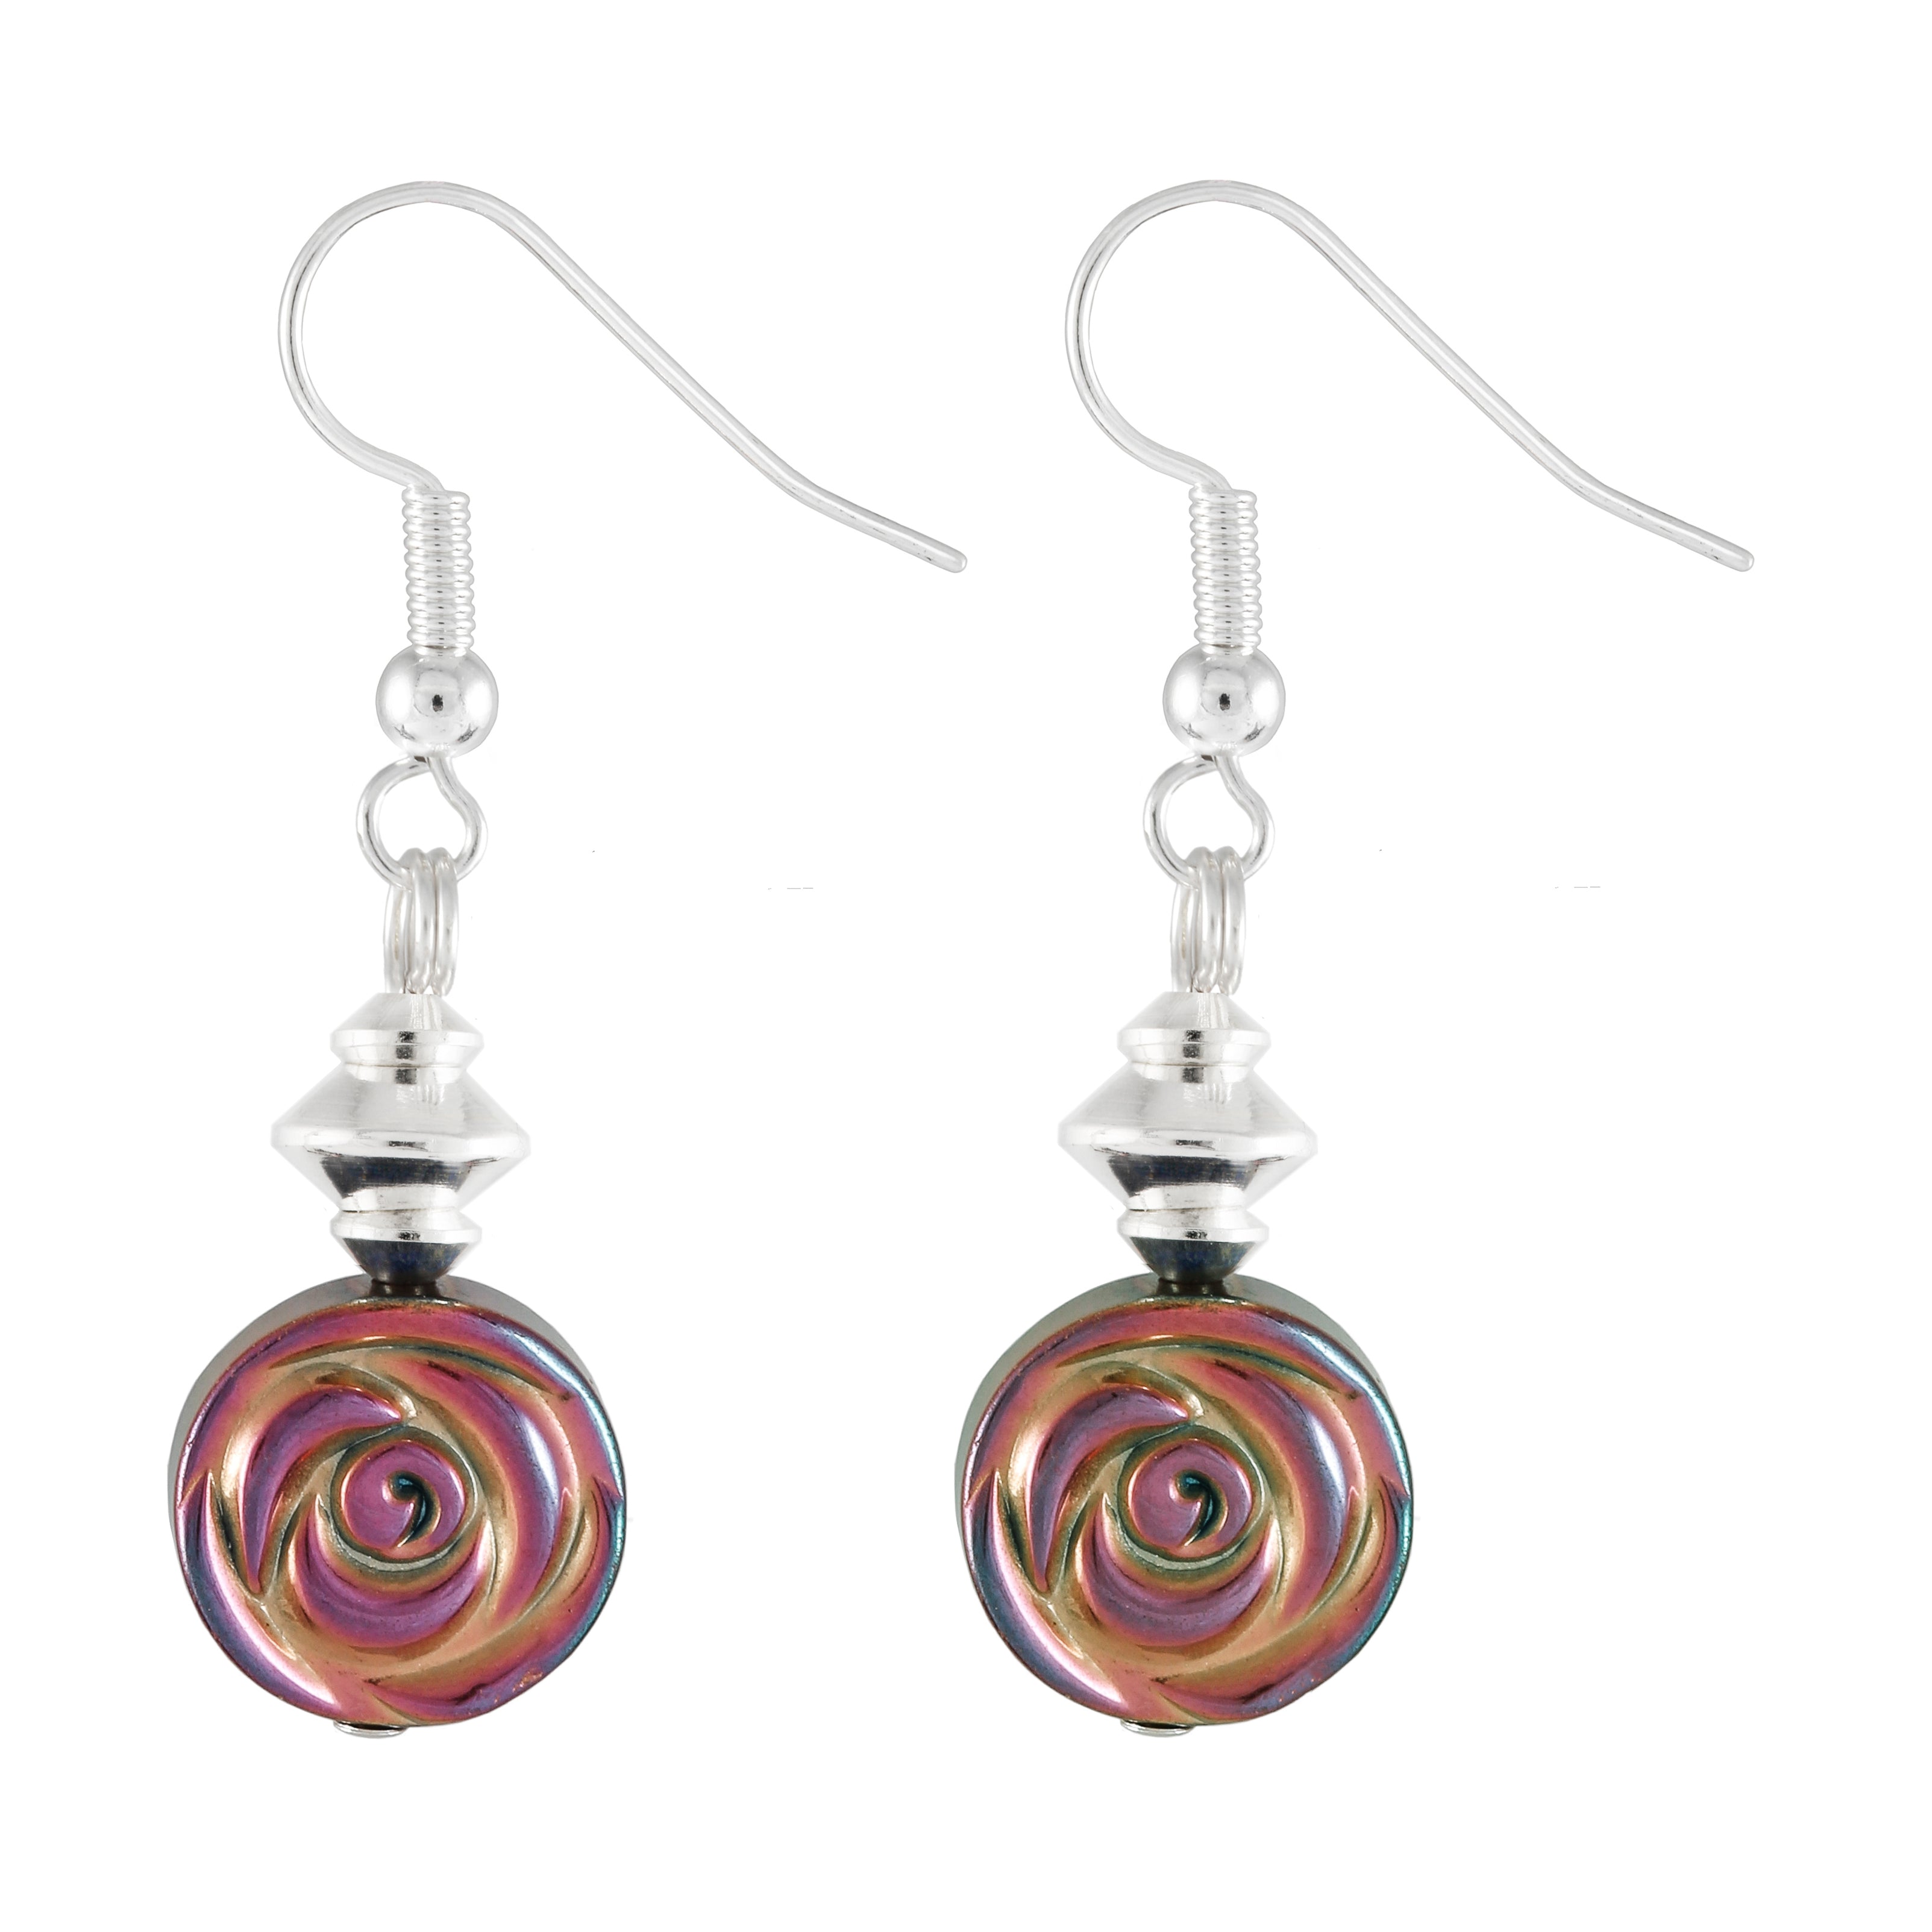 Multicoloured electroplated hematite disc earrings with hints of pink, green, gold and bronze.